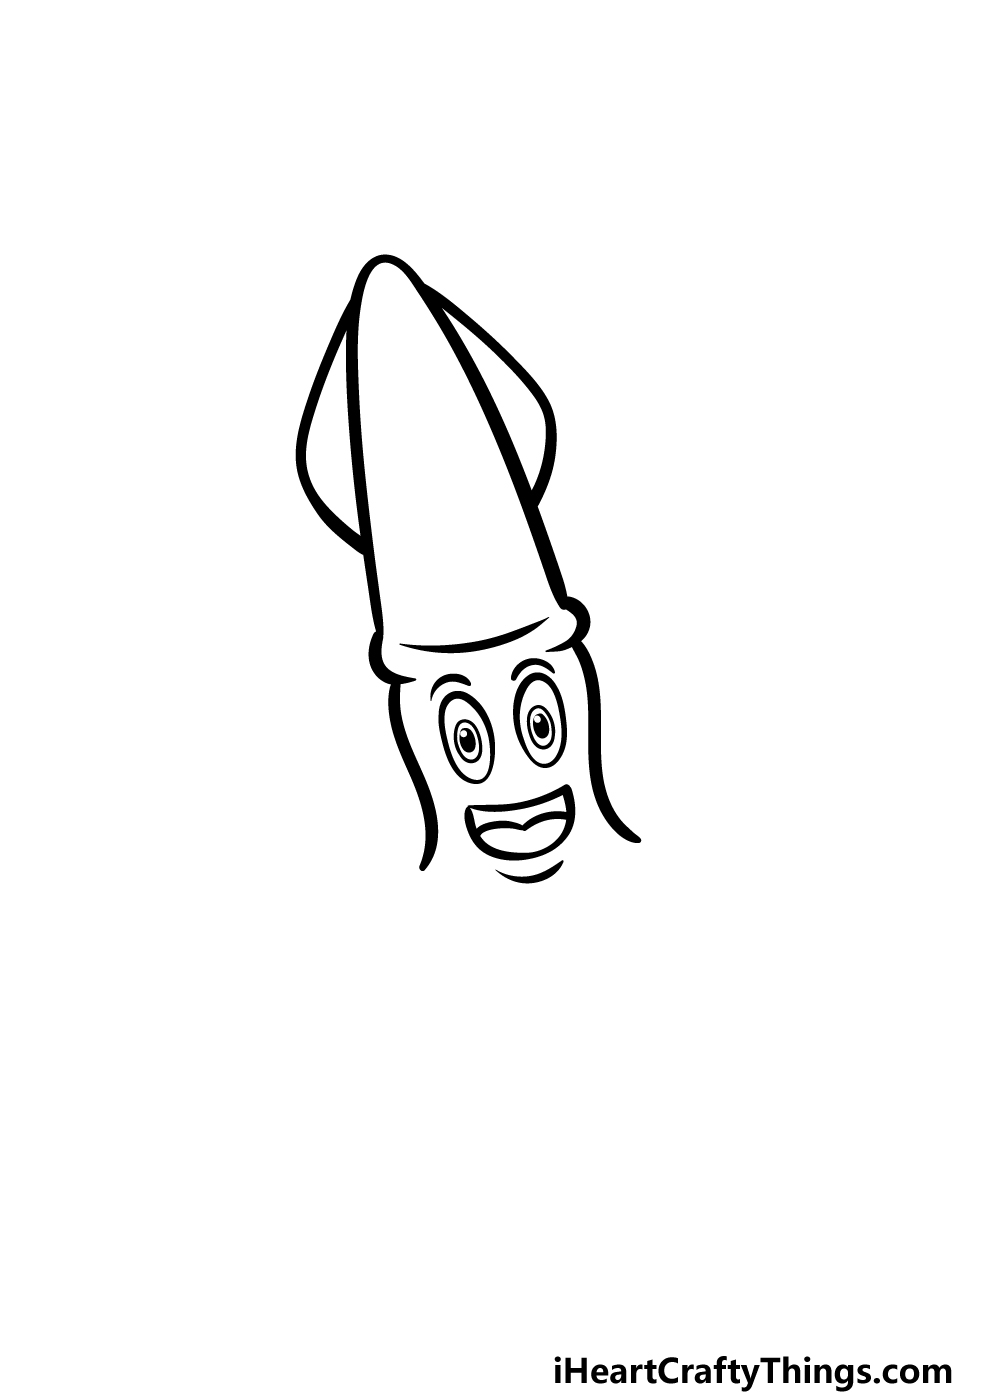 Cartoon Squid Drawing - How To Draw A Cartoon Squid Step By Step